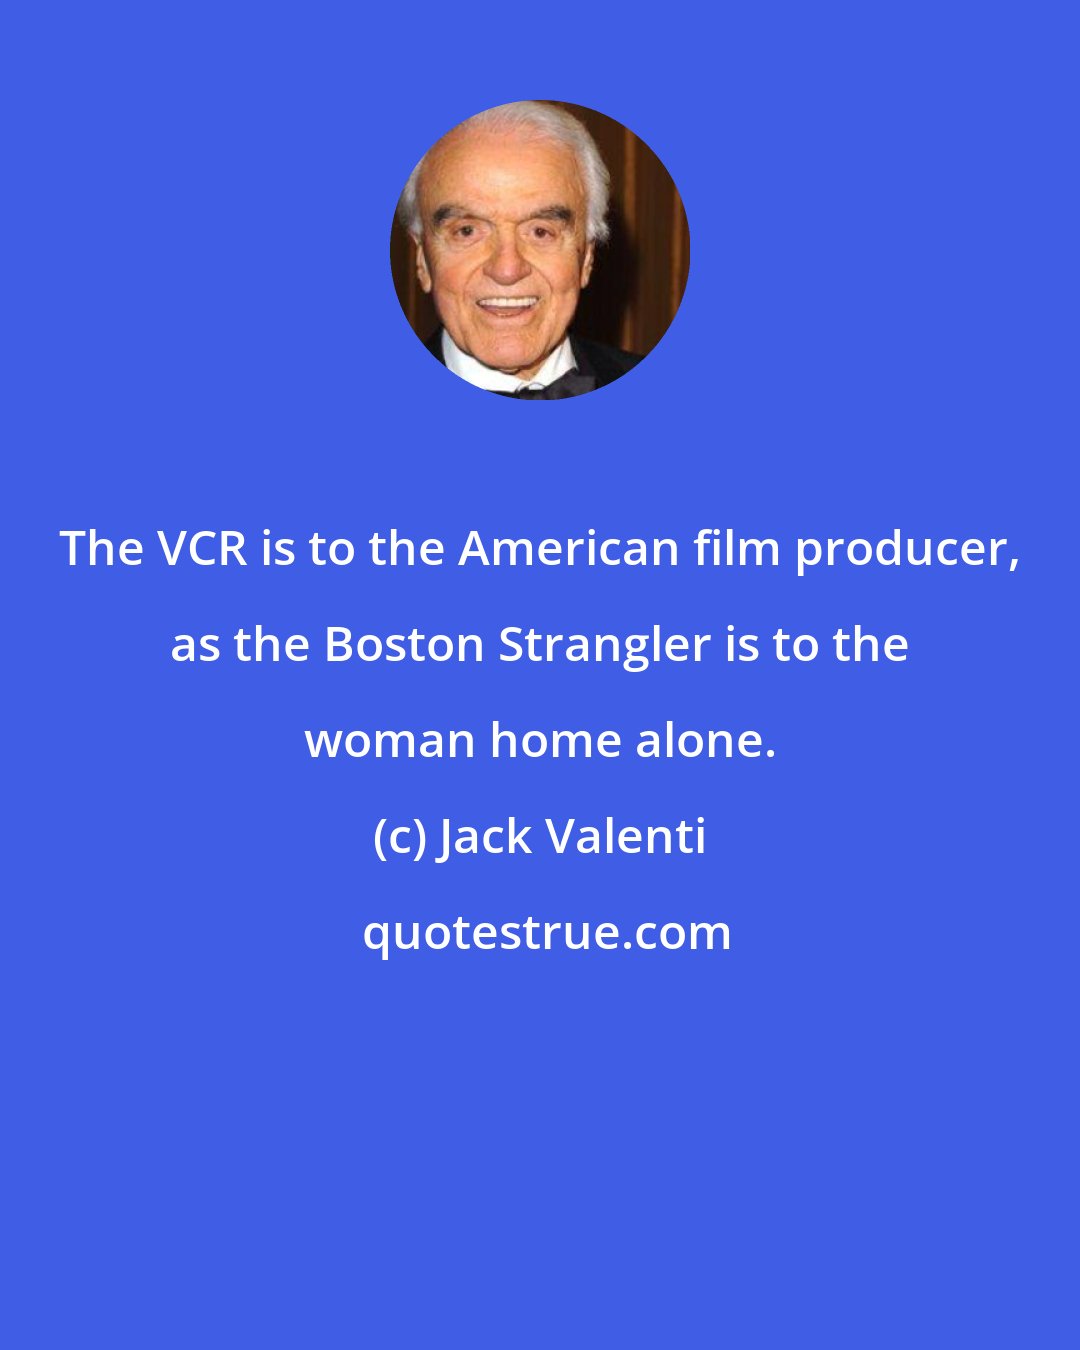 Jack Valenti: The VCR is to the American film producer, as the Boston Strangler is to the woman home alone.